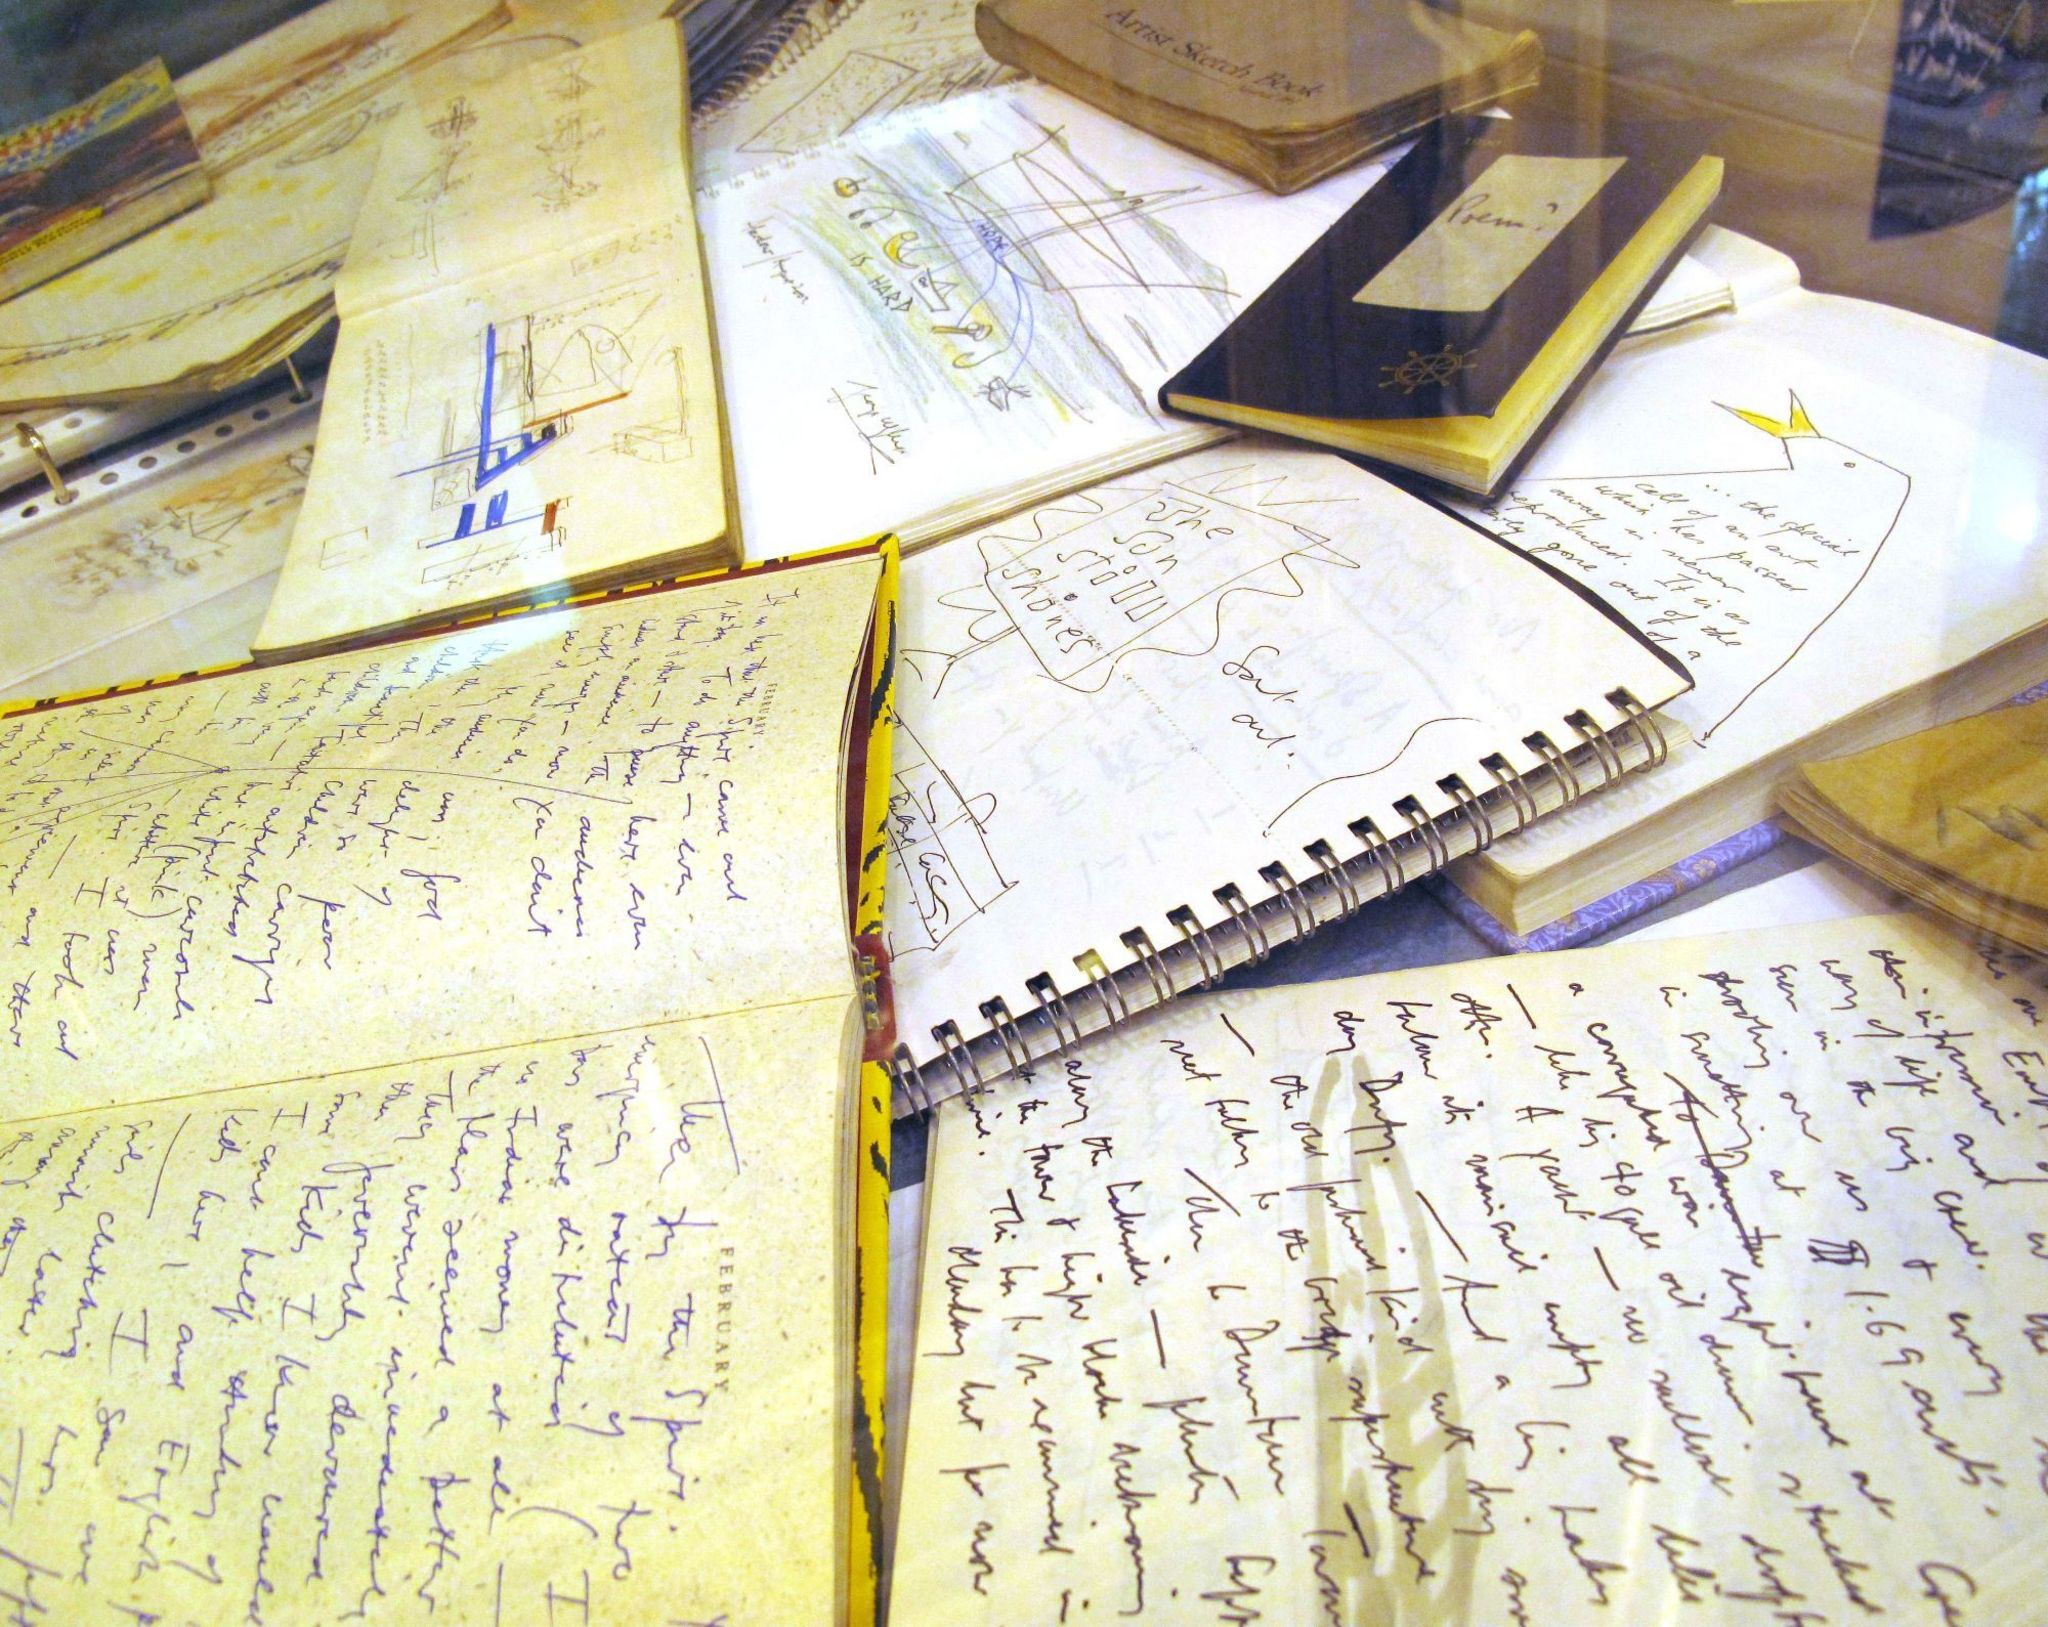 Collection of George's sketchbooks featuring writings and drawings